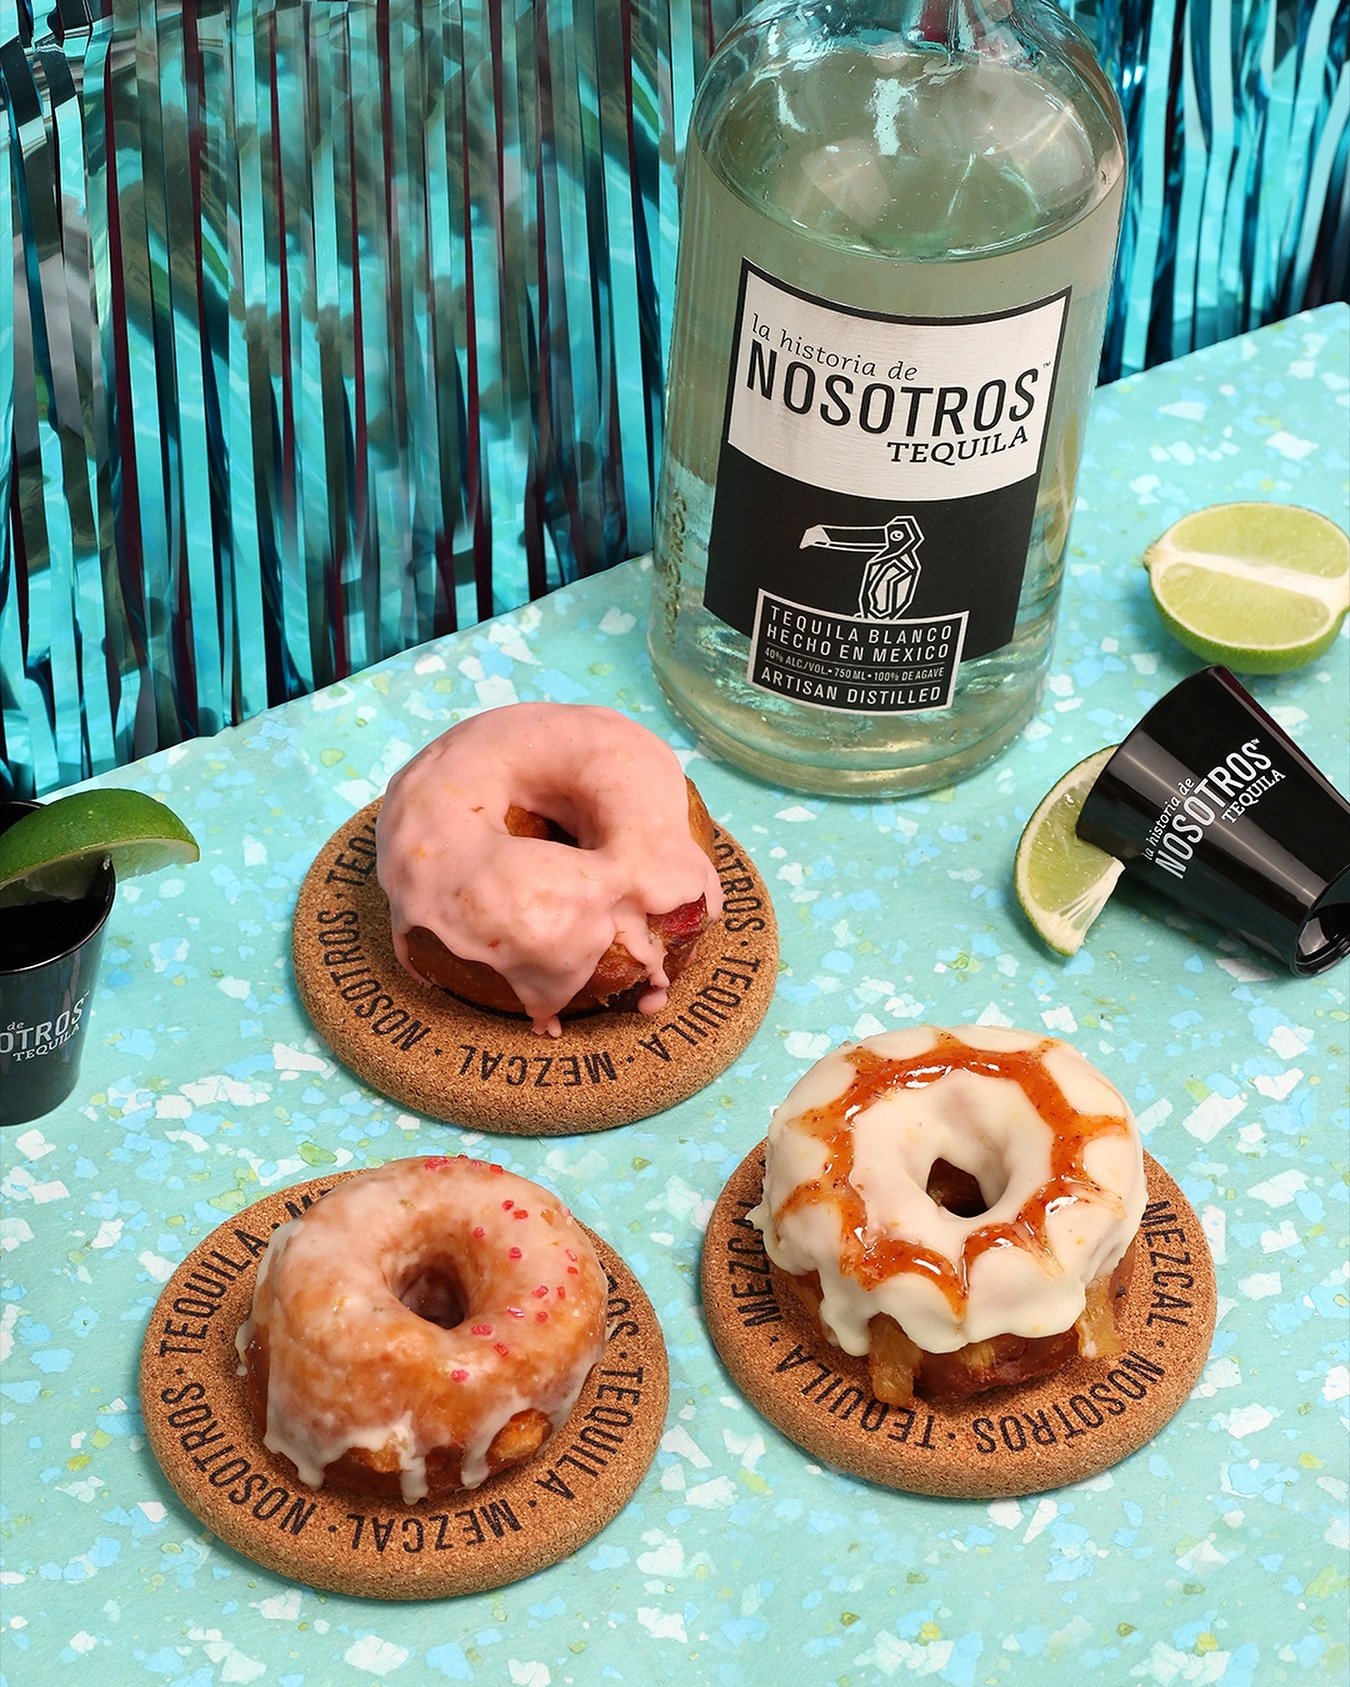 We&rsquo;re doing a collaboration with @nosotros for Cinco de Mayo and offering a flight of 3 mini donuts infused with their tequila and mezcal. 

From @nosotros: &ldquo;Nosotros Tequila and Mezcal is proud to partner with Dynamo Donut &amp; Coffee f